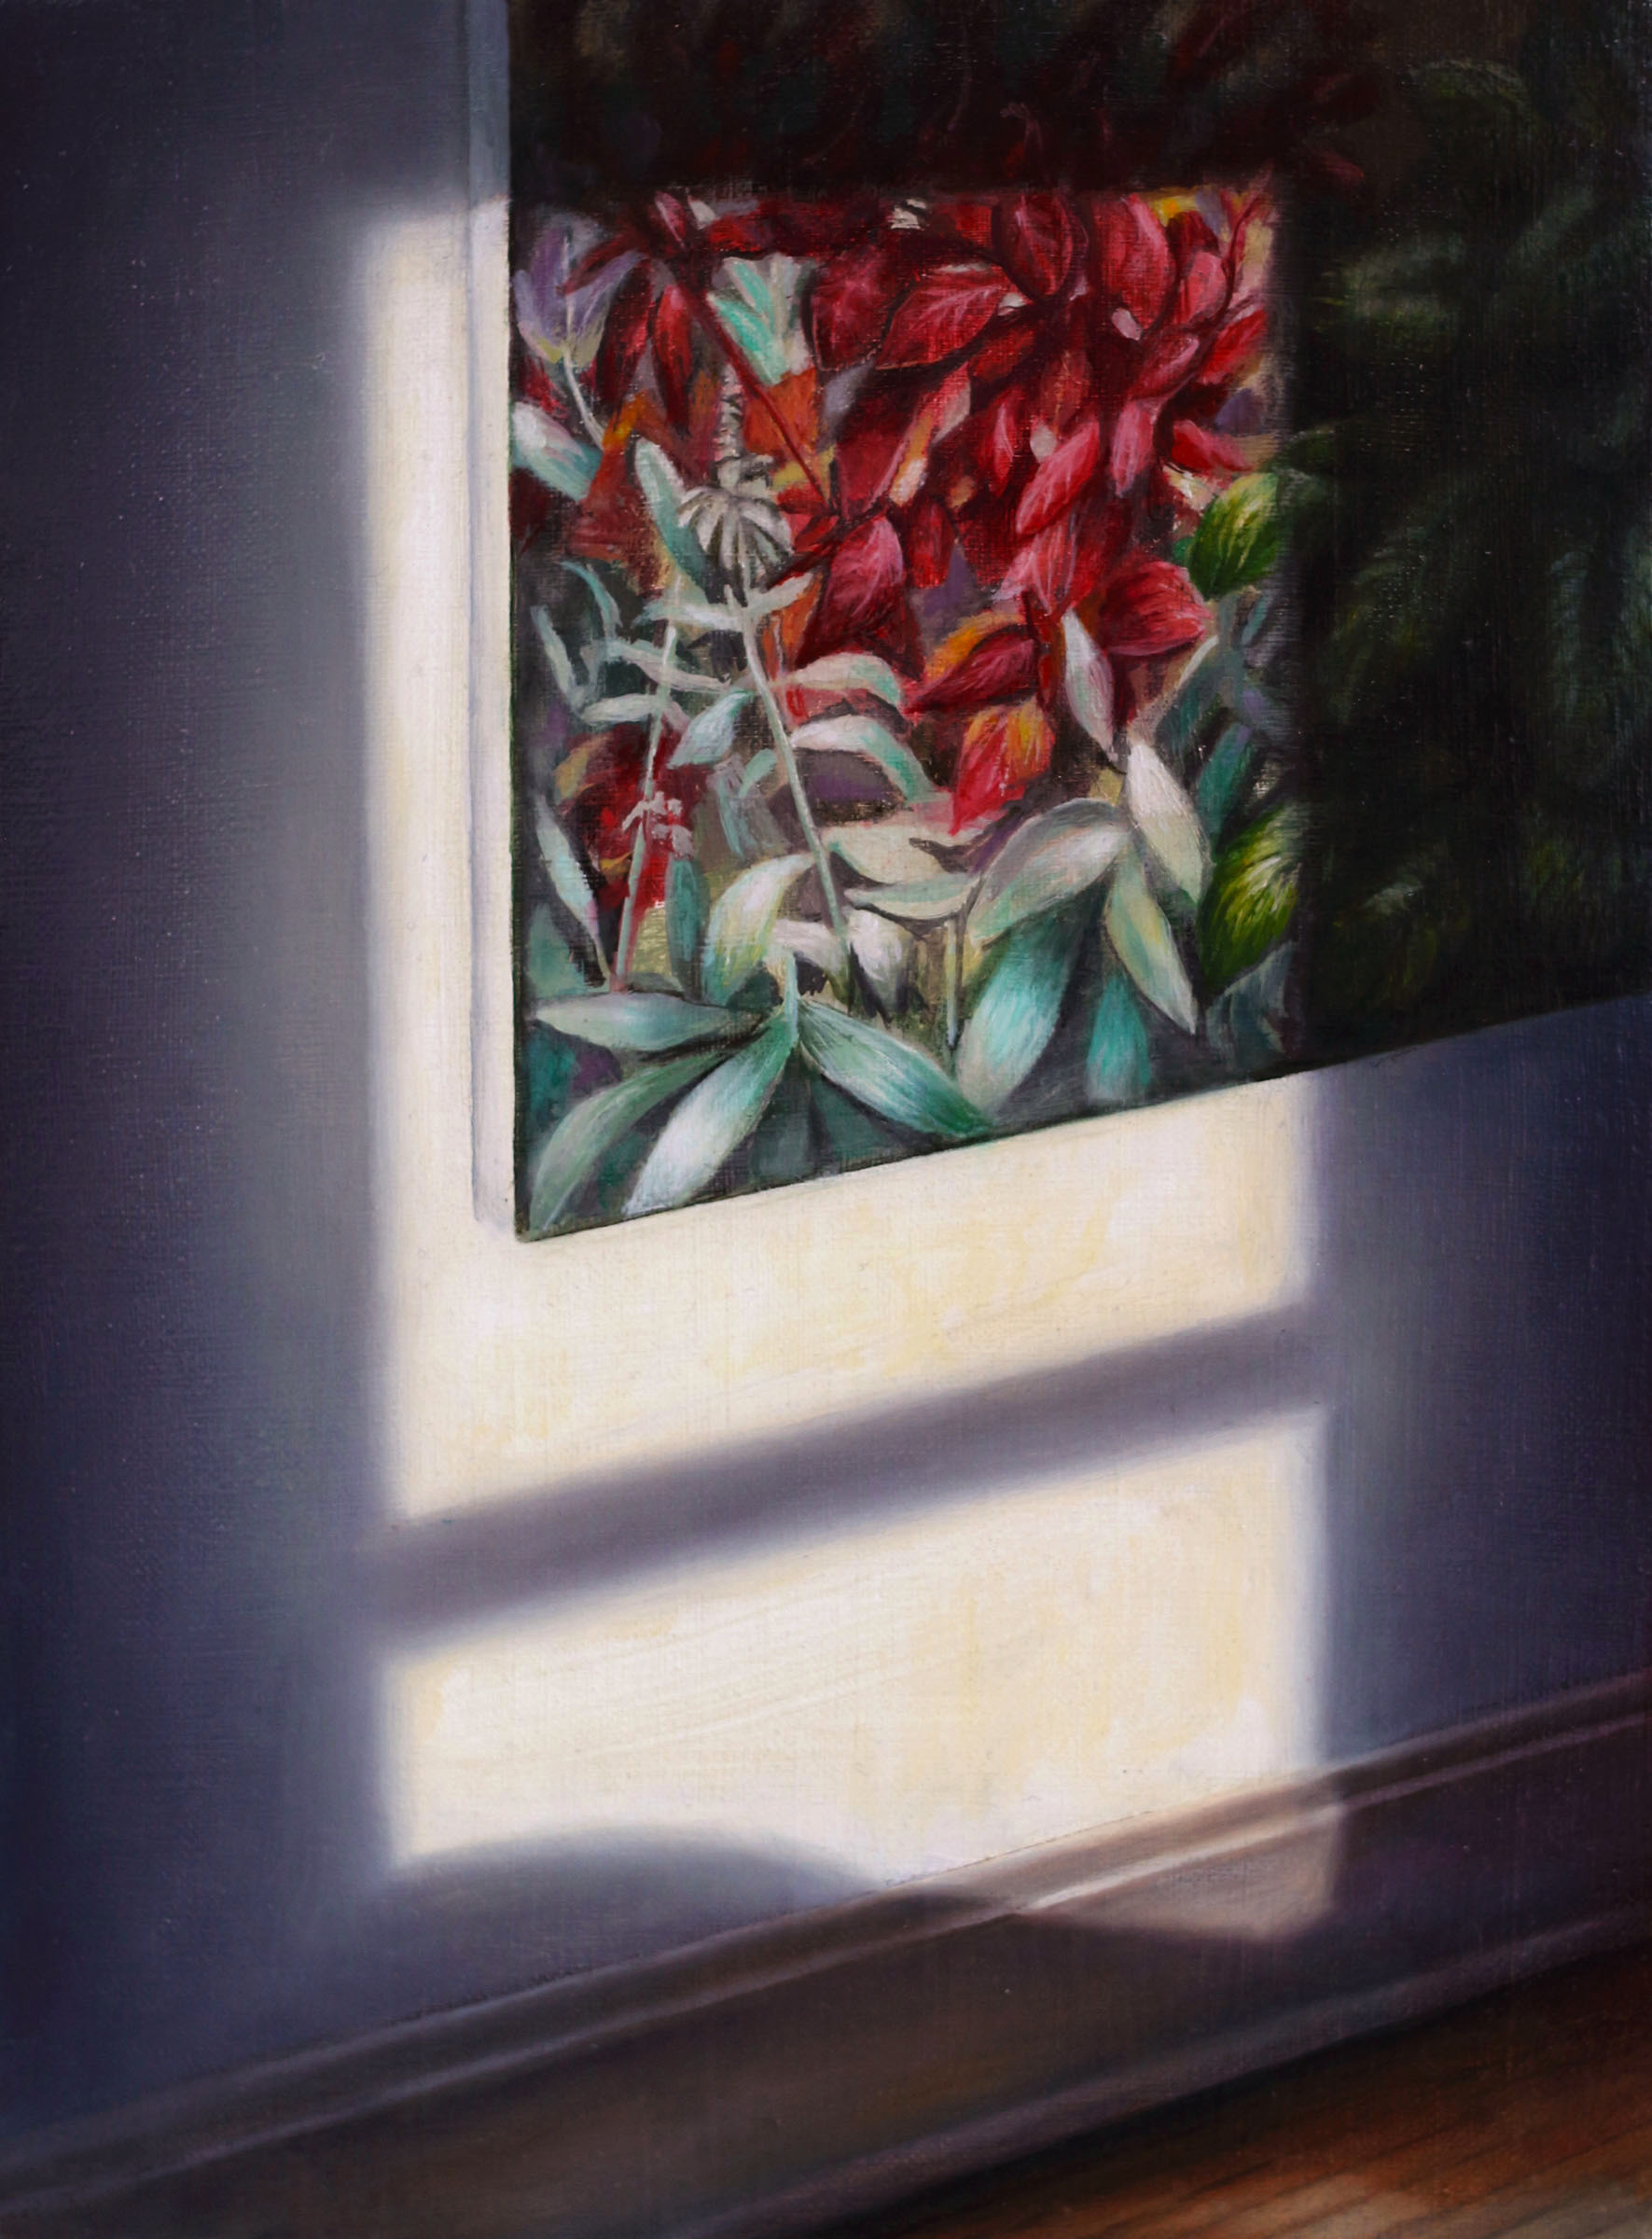   Window Light    (on James L. Stephens painting)  2017  Oil on linen  12 x 9 inches    